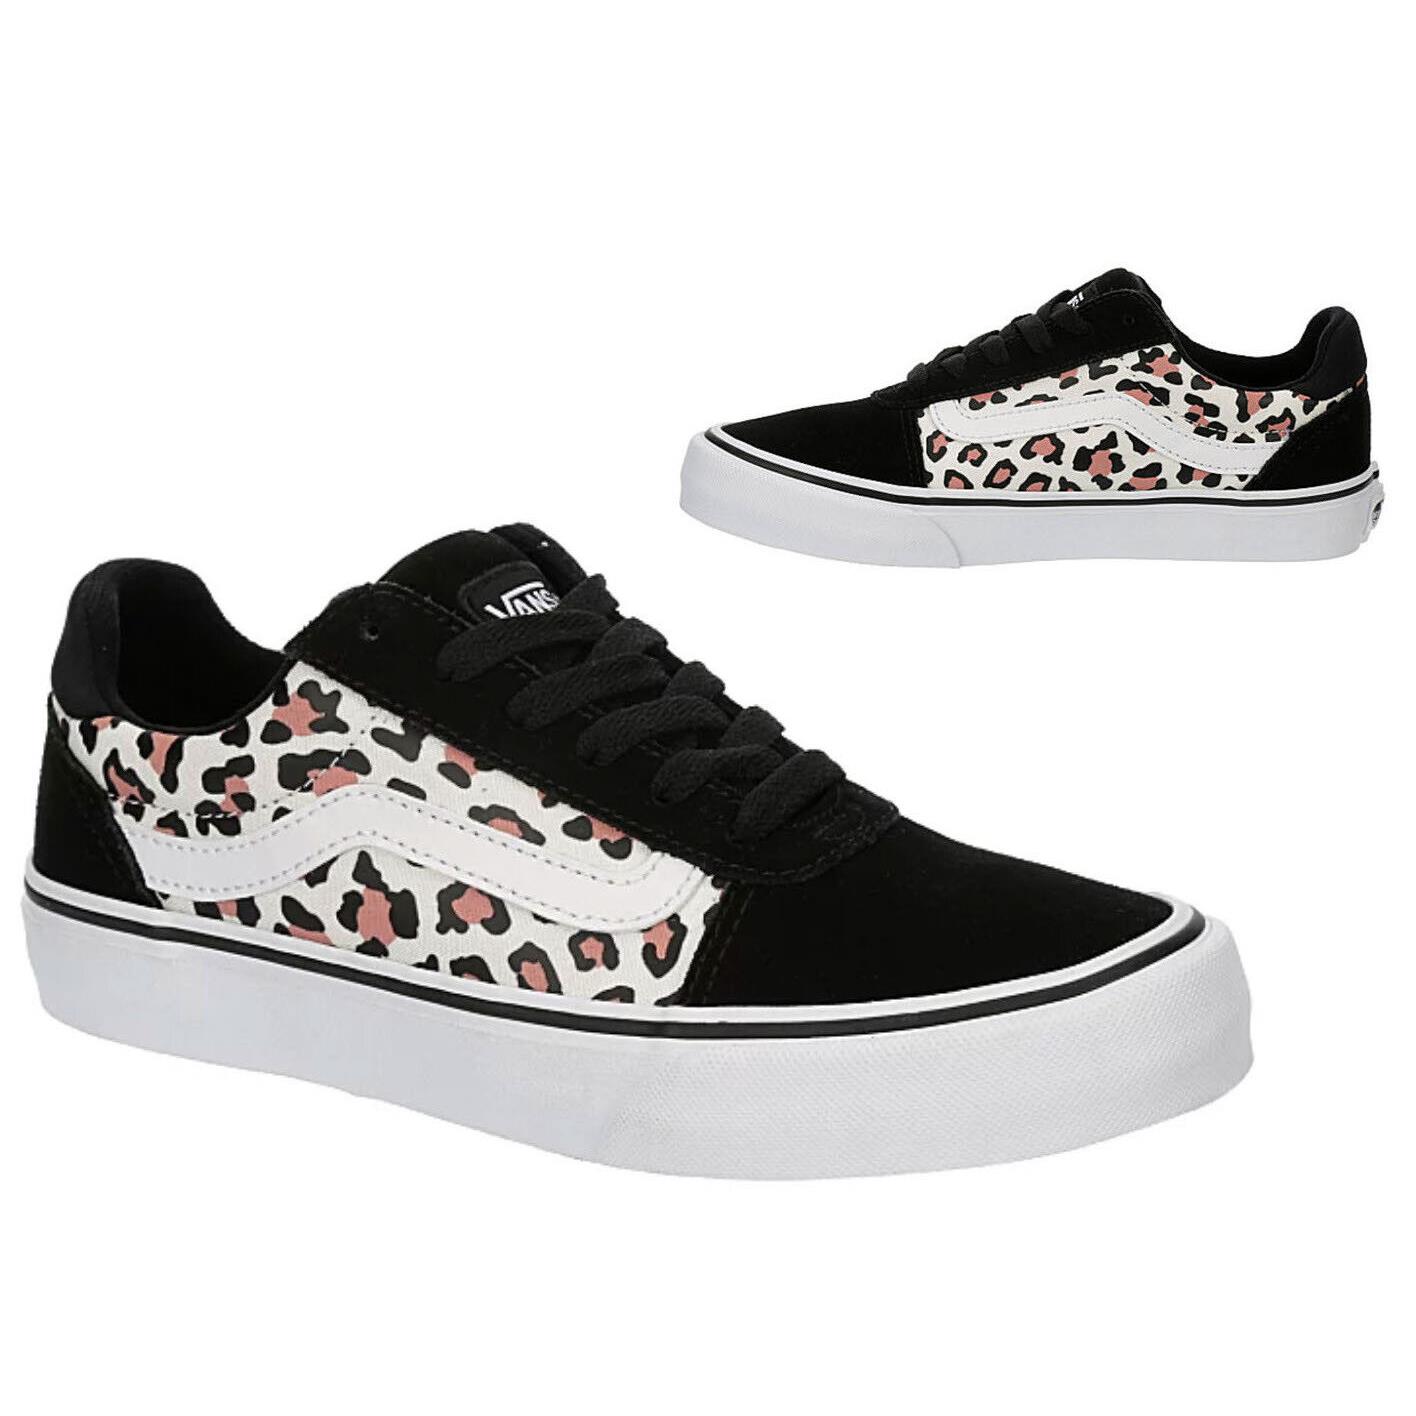 Vans Leopard Ward Casual Womens Sneakers Shoes Black Blush All Sizes - Leopard